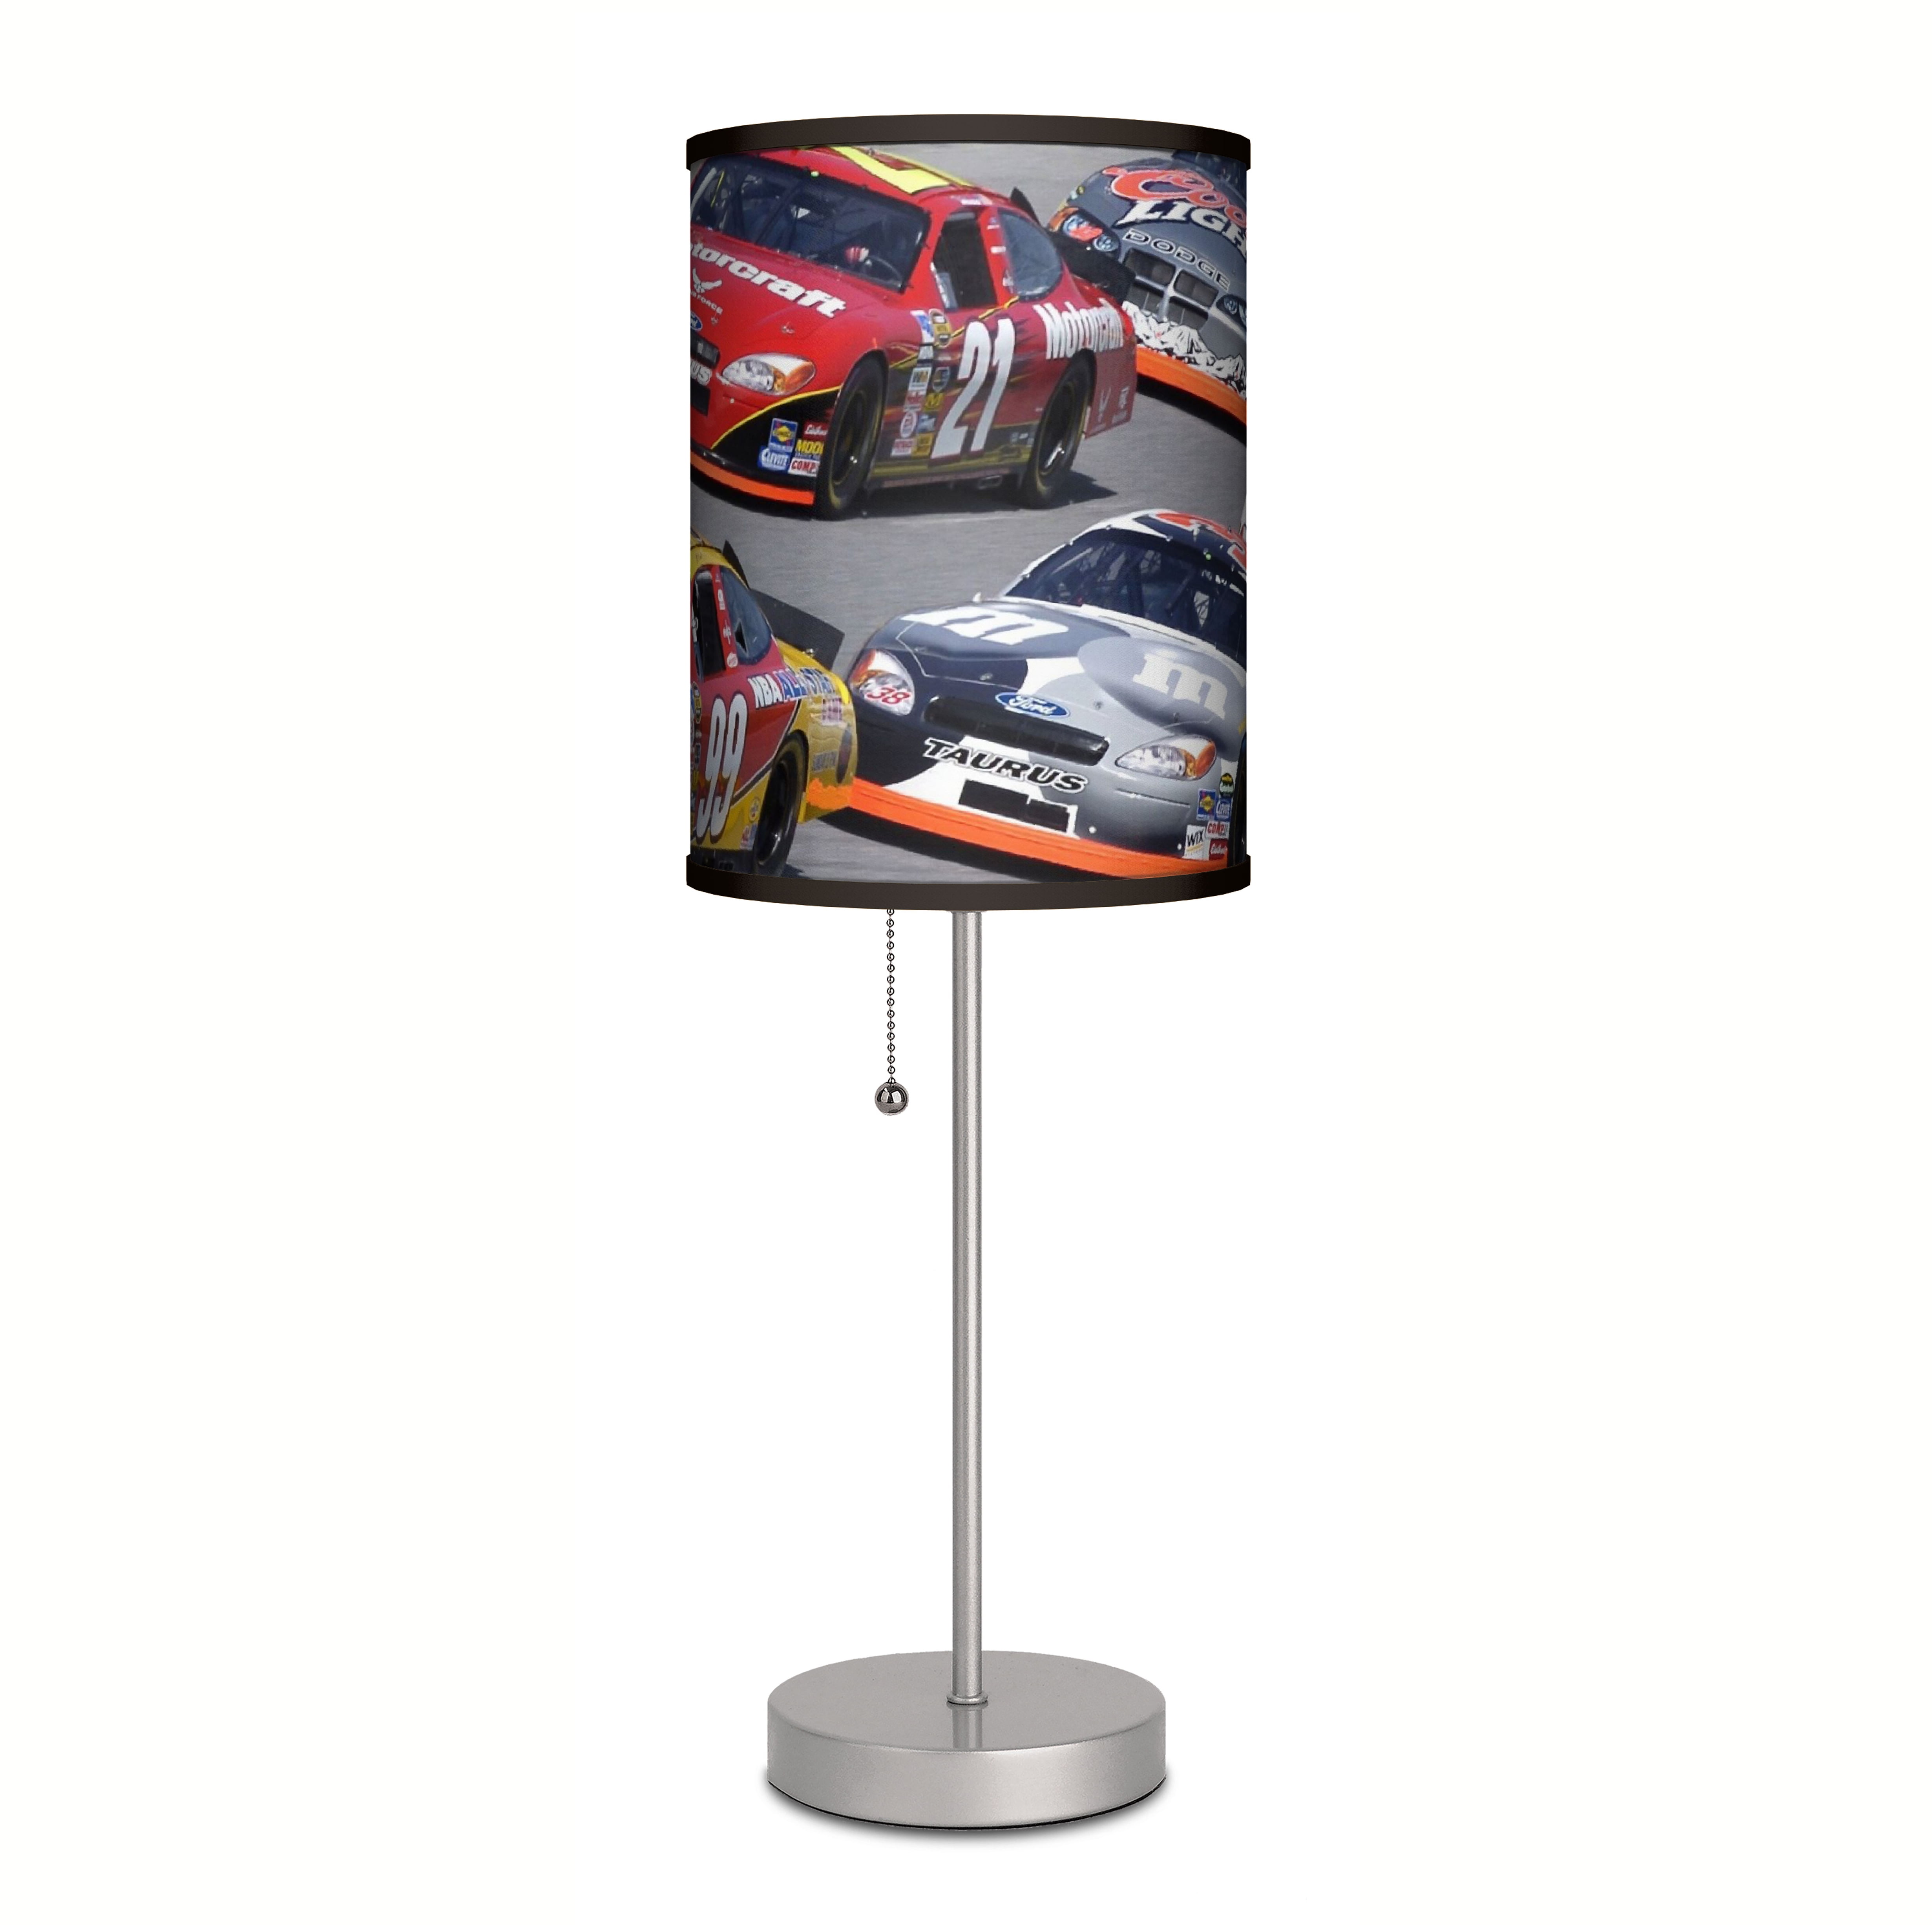 Details about   HANDMADE LAMPSHADE boys bedroom  lamp pendant  red blue  green raicing cars 